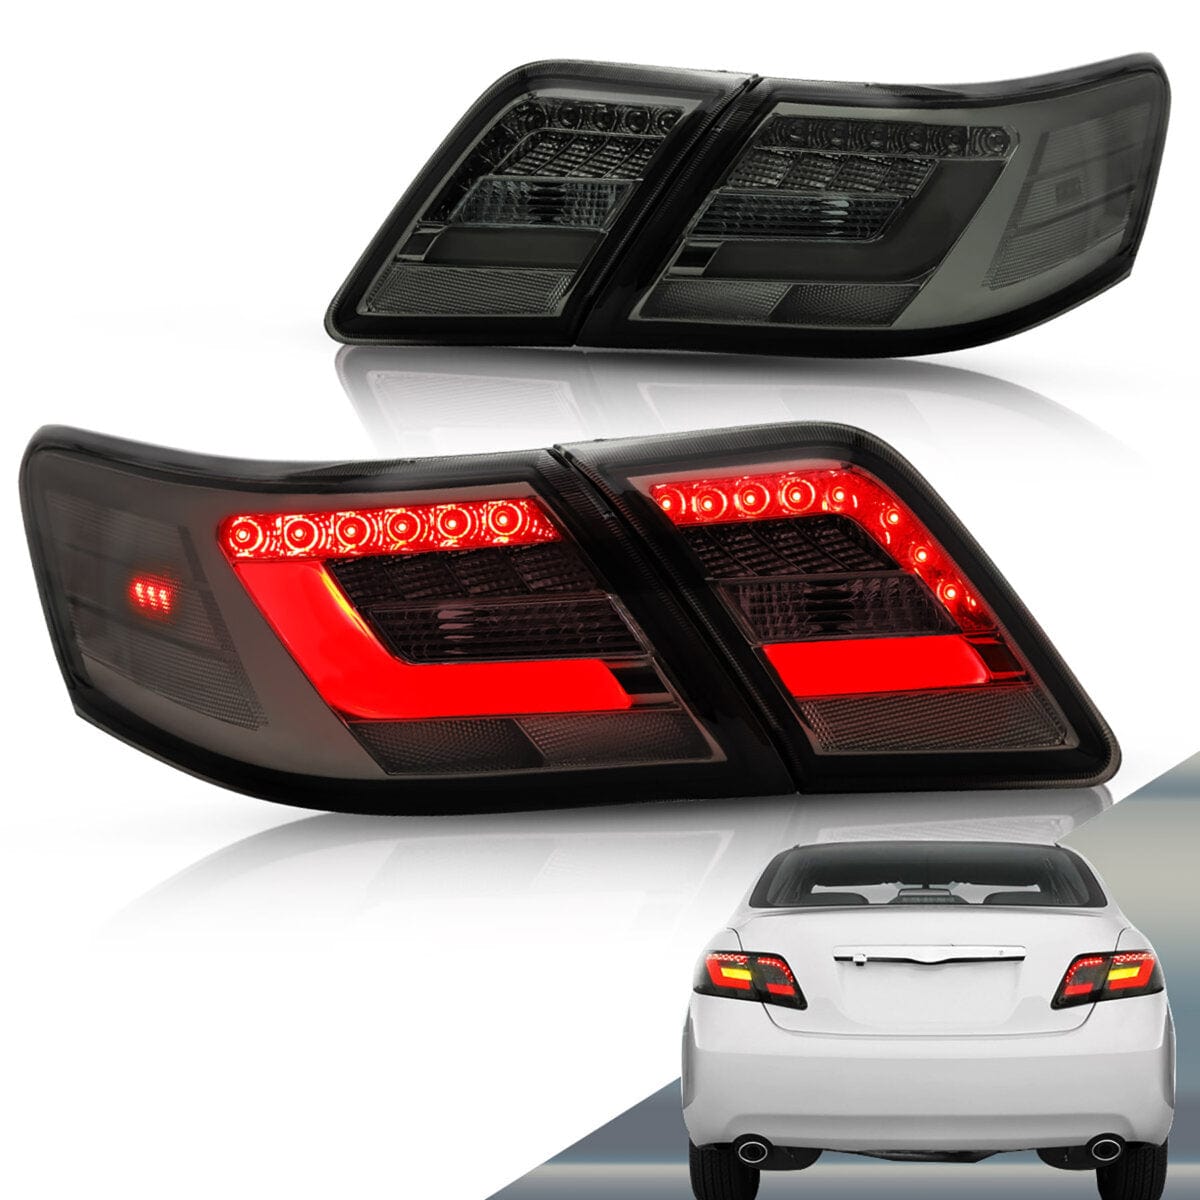 2006-2011 TOYOTA CAMRY Tail Lights - RGB Halo Kits Multicolor Flow Series Color Chasing RGBWA LED headlight kit Colorshift Oracle Lighting Trendz OneUpLighting Morimoto theretrofitsource AutoLEDTech Diode Dynamics